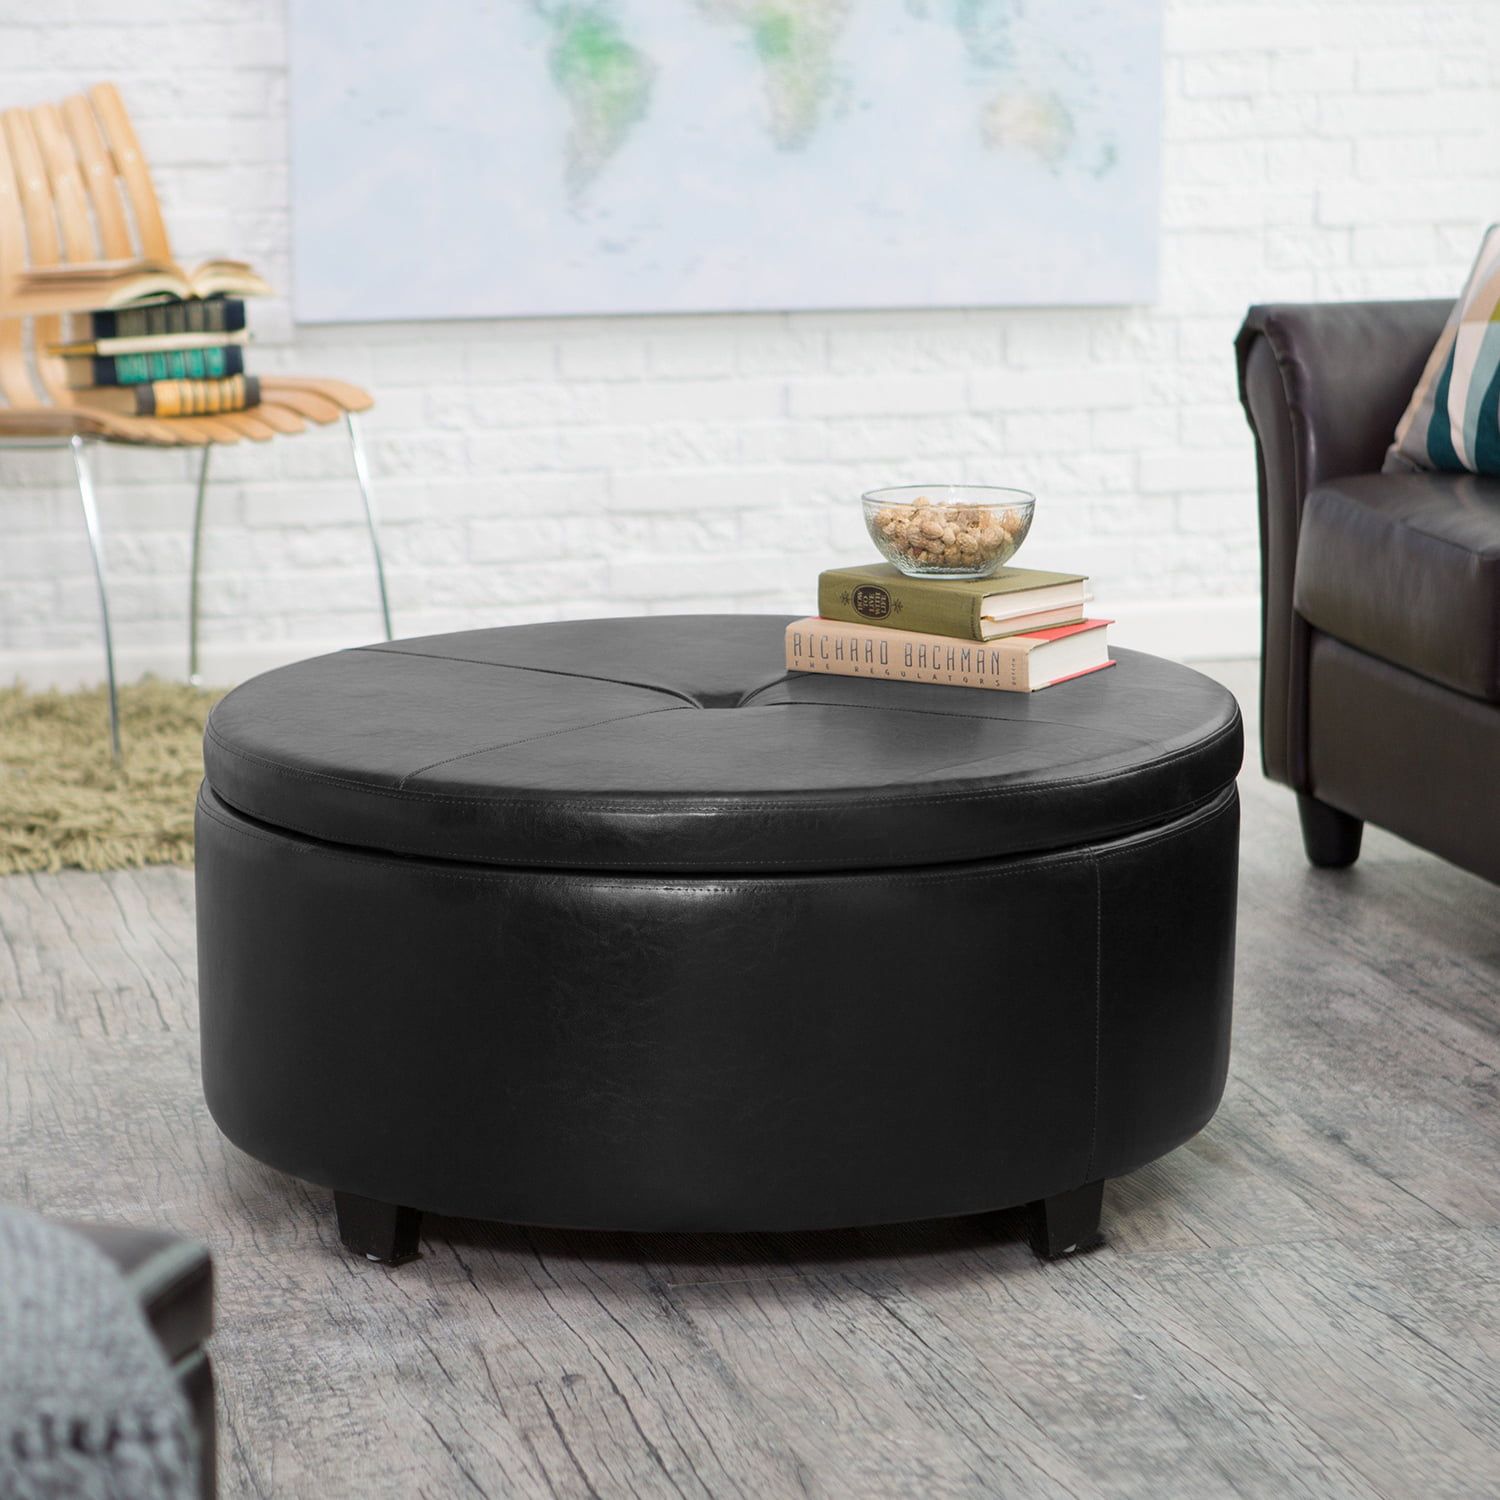 Lacoo Large Round Storage Ottoman Comfort Footrest, Black Faux Leather –  Walmart With Brown Wash Round Ottomans (View 15 of 15)